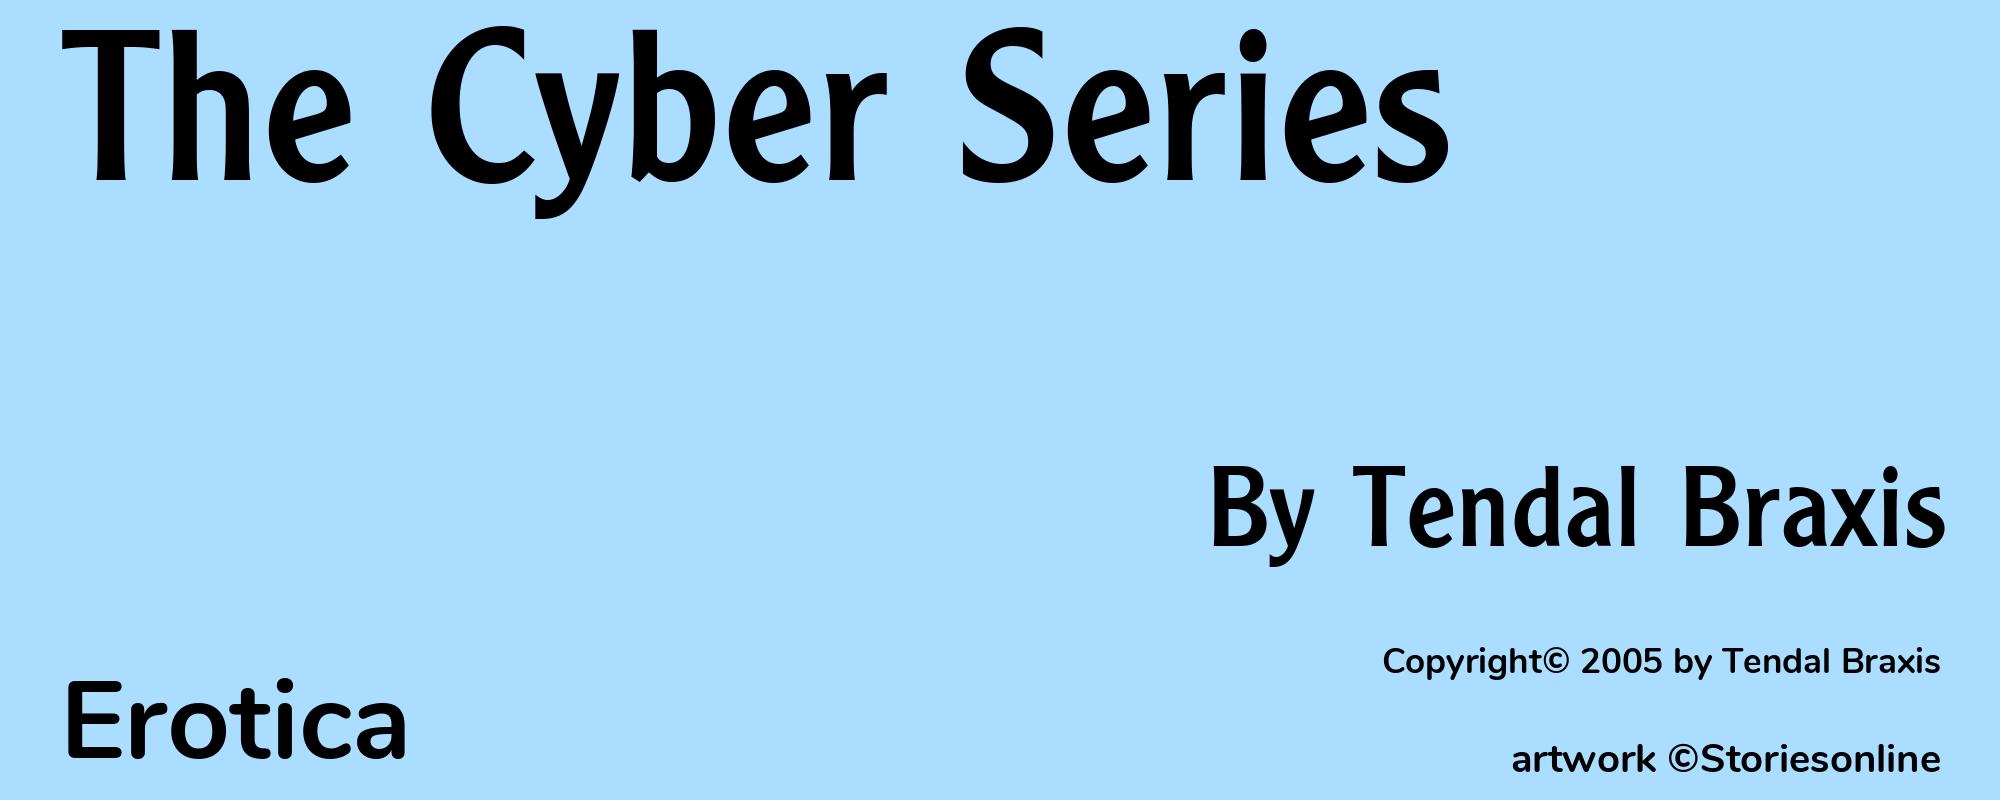 The Cyber Series - Cover